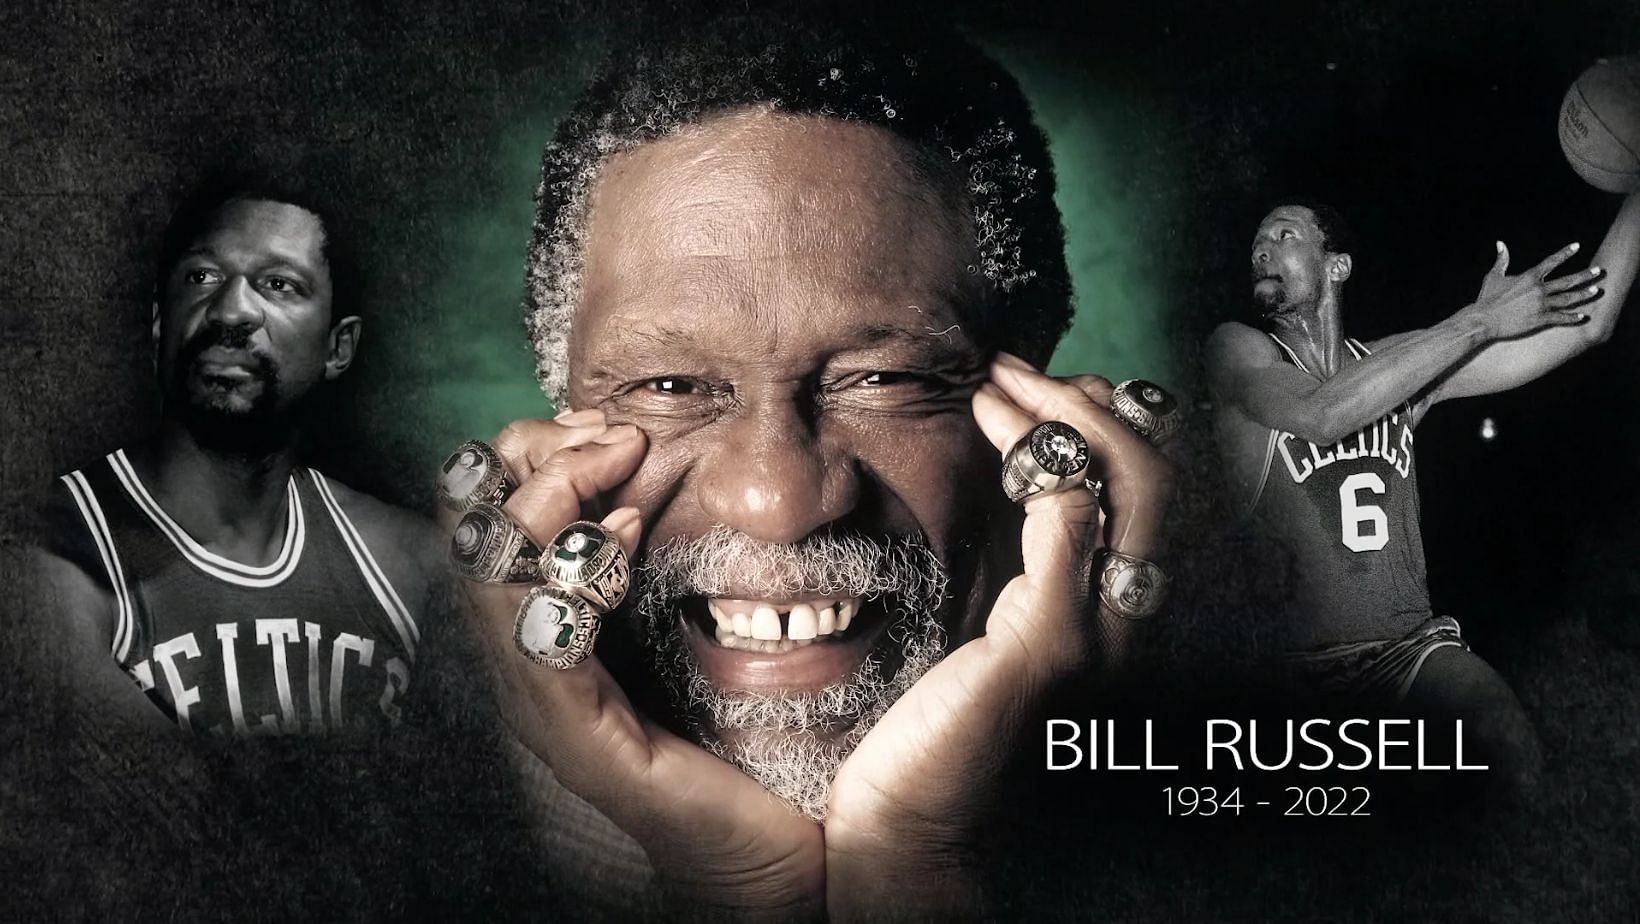 The late Bill Russell won 11 championships in 13 seasons with the Boston Celtics.